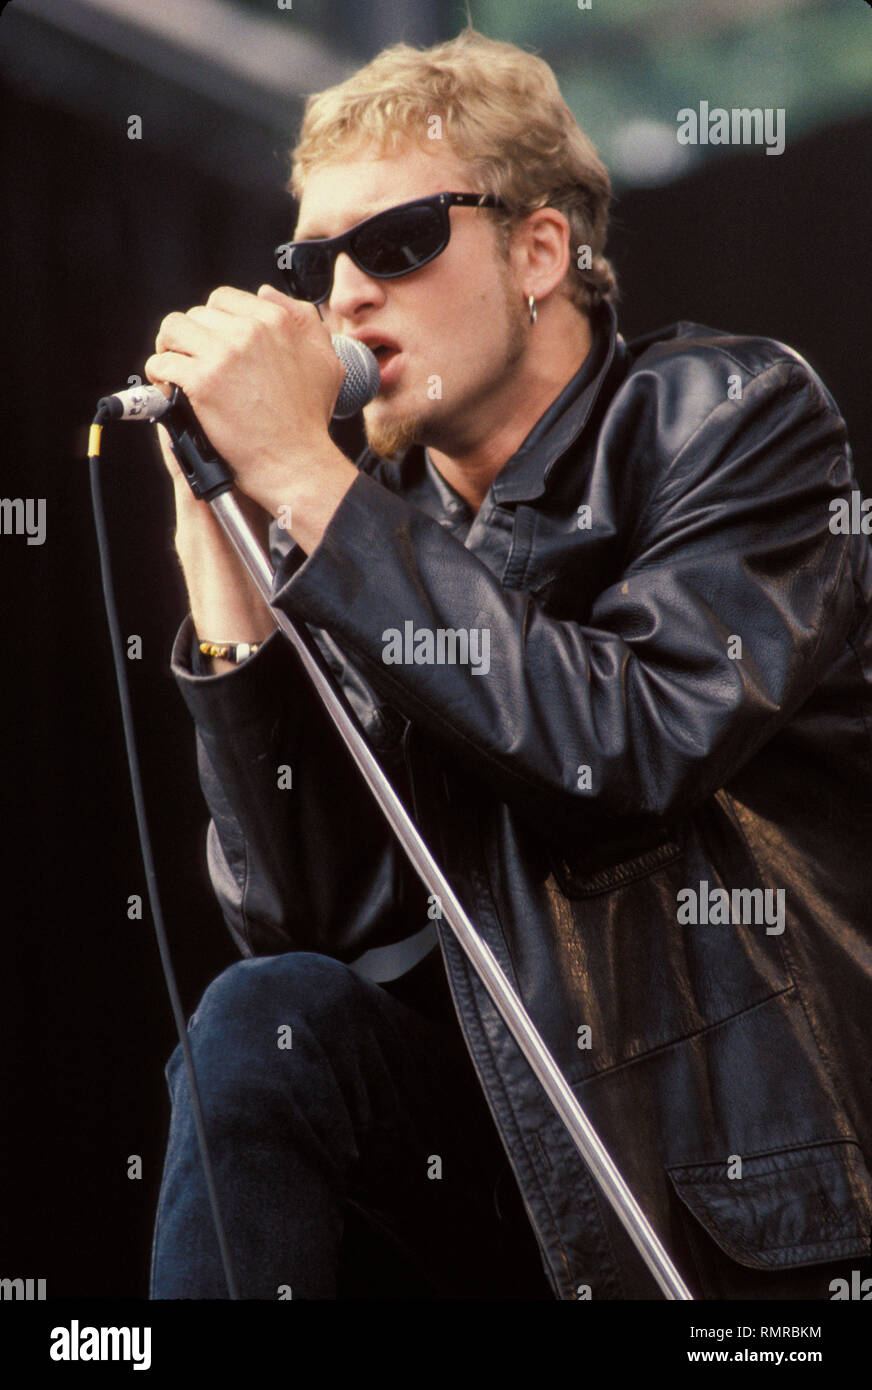 Singer Layne Staley is shown performing on stage during a 'live' concert appearance with Alice In Chains. Stock Photo